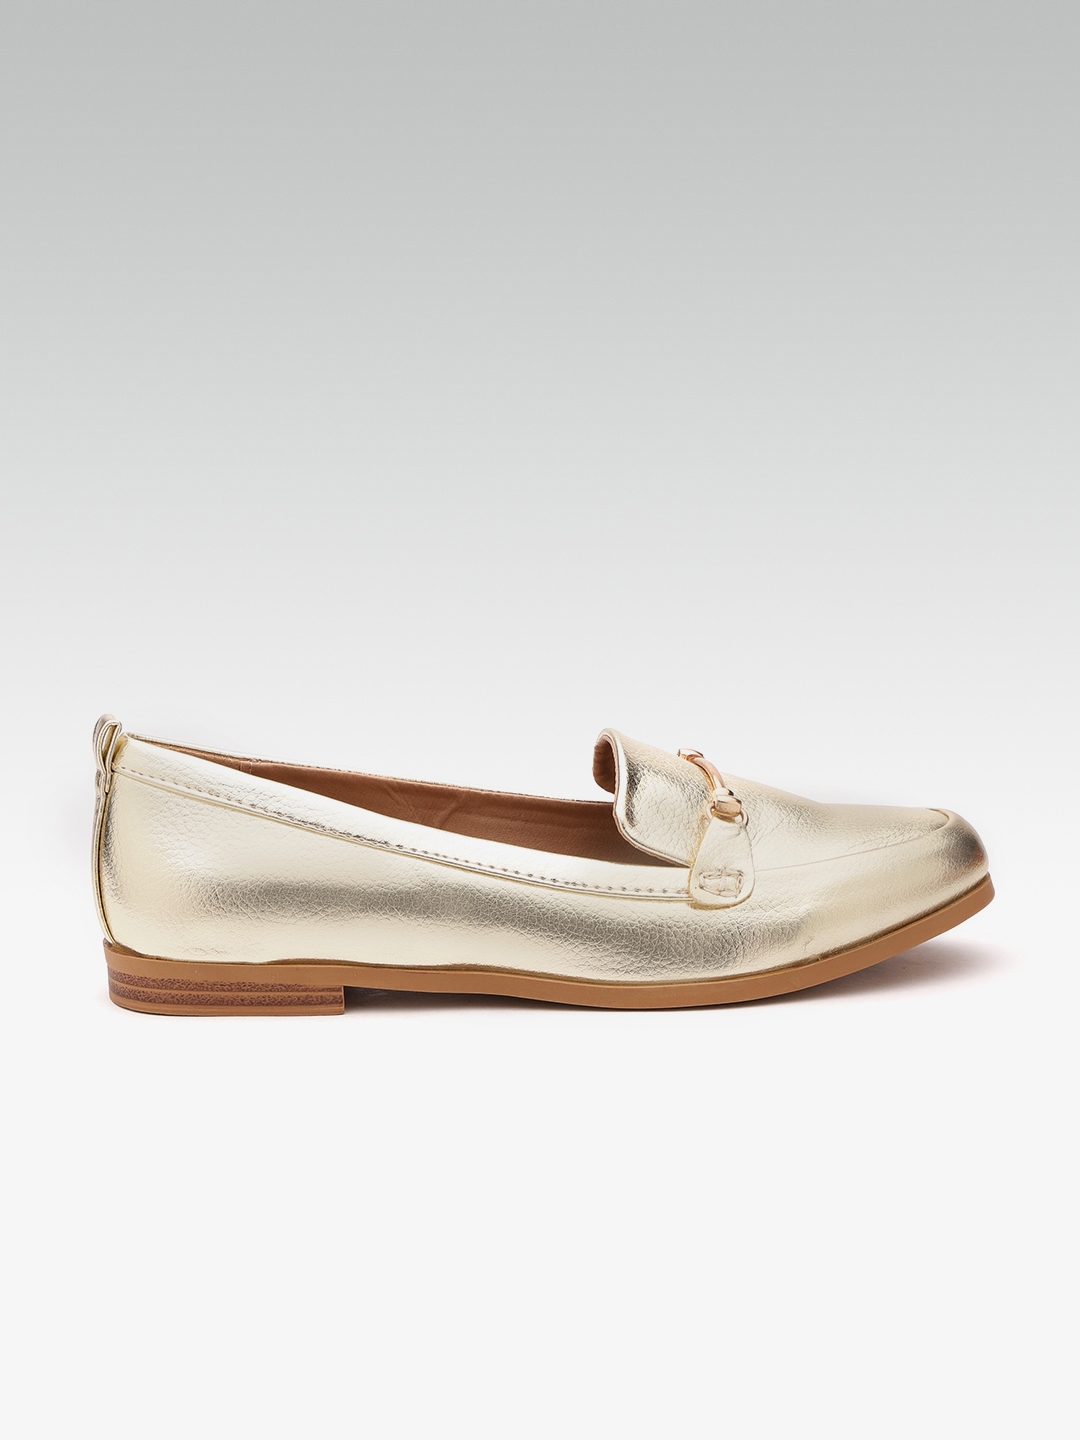 dorothy perkins tan loafers